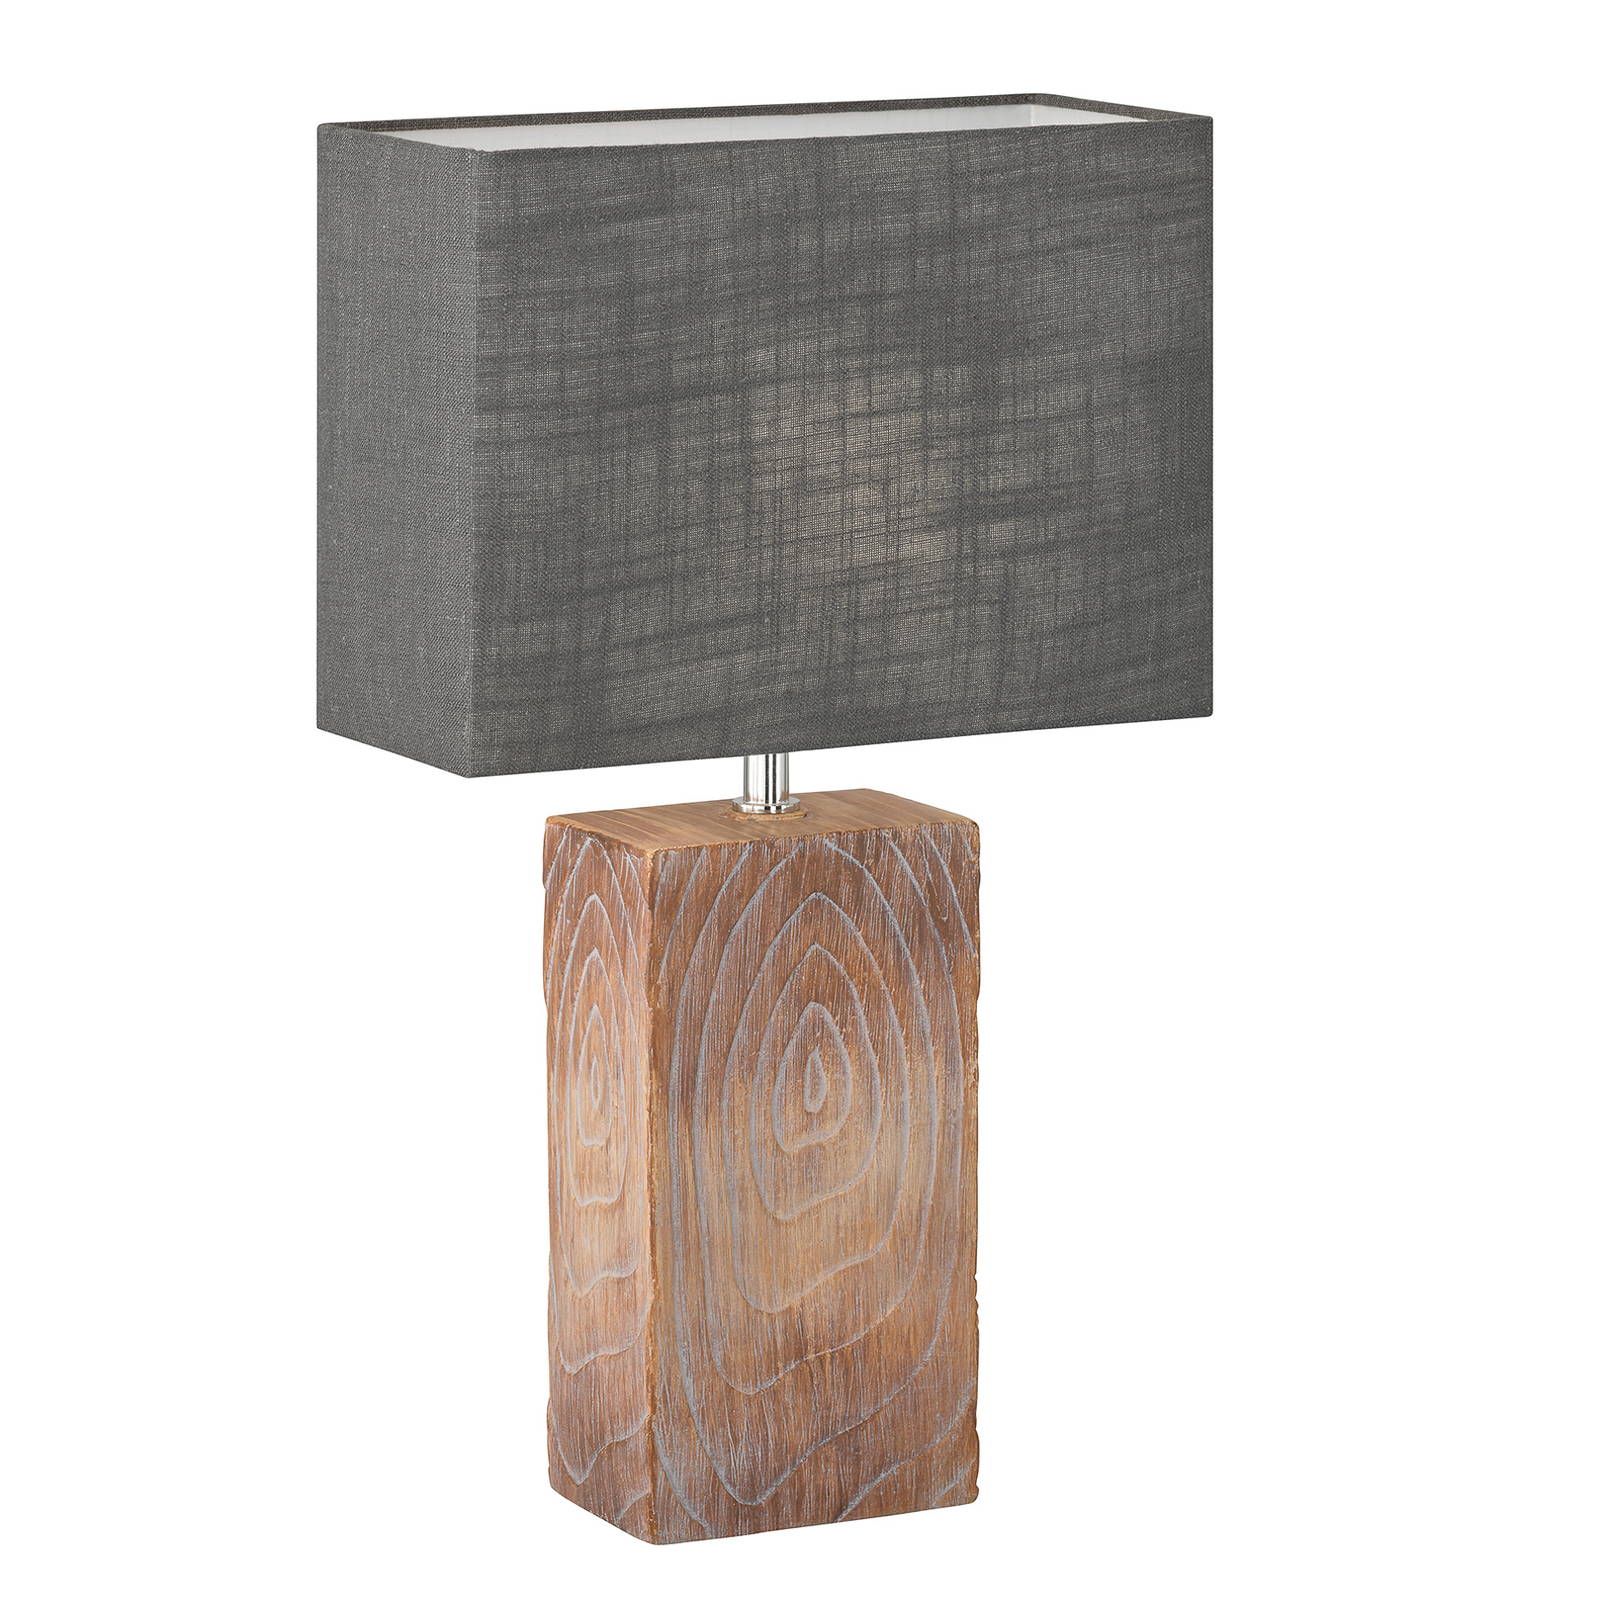 Bronco table lamp with linen shade Height 50 cm